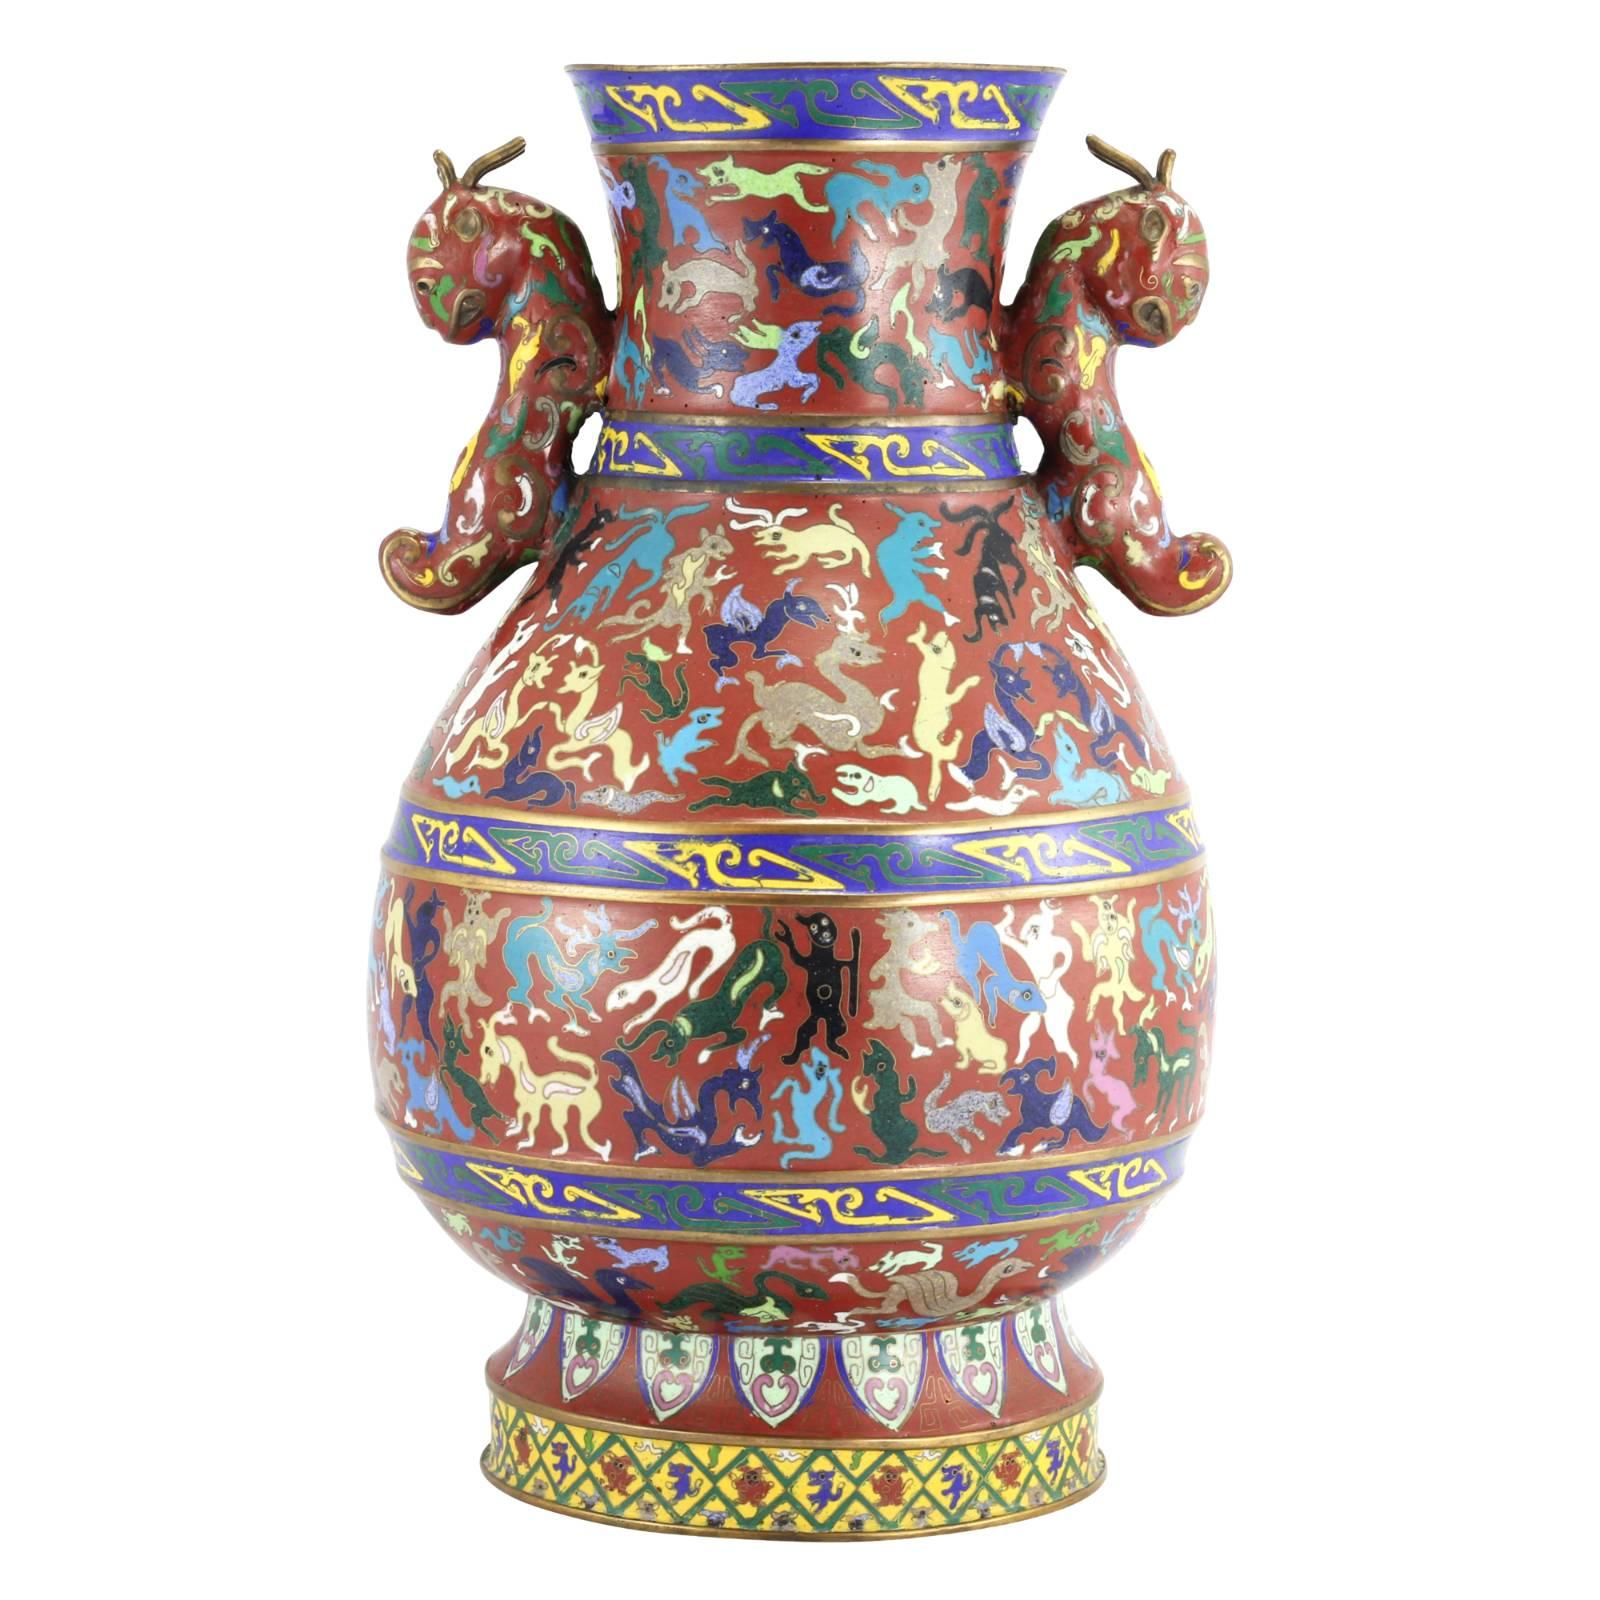 A pair of Chinese enamel vases, dating to the early 20th century, decorated with a cloisonne animal motif.

Cloisonne is an ancient technique used to decorate metalwork with inlays of enamel, which is exhibited in this colorful expression of